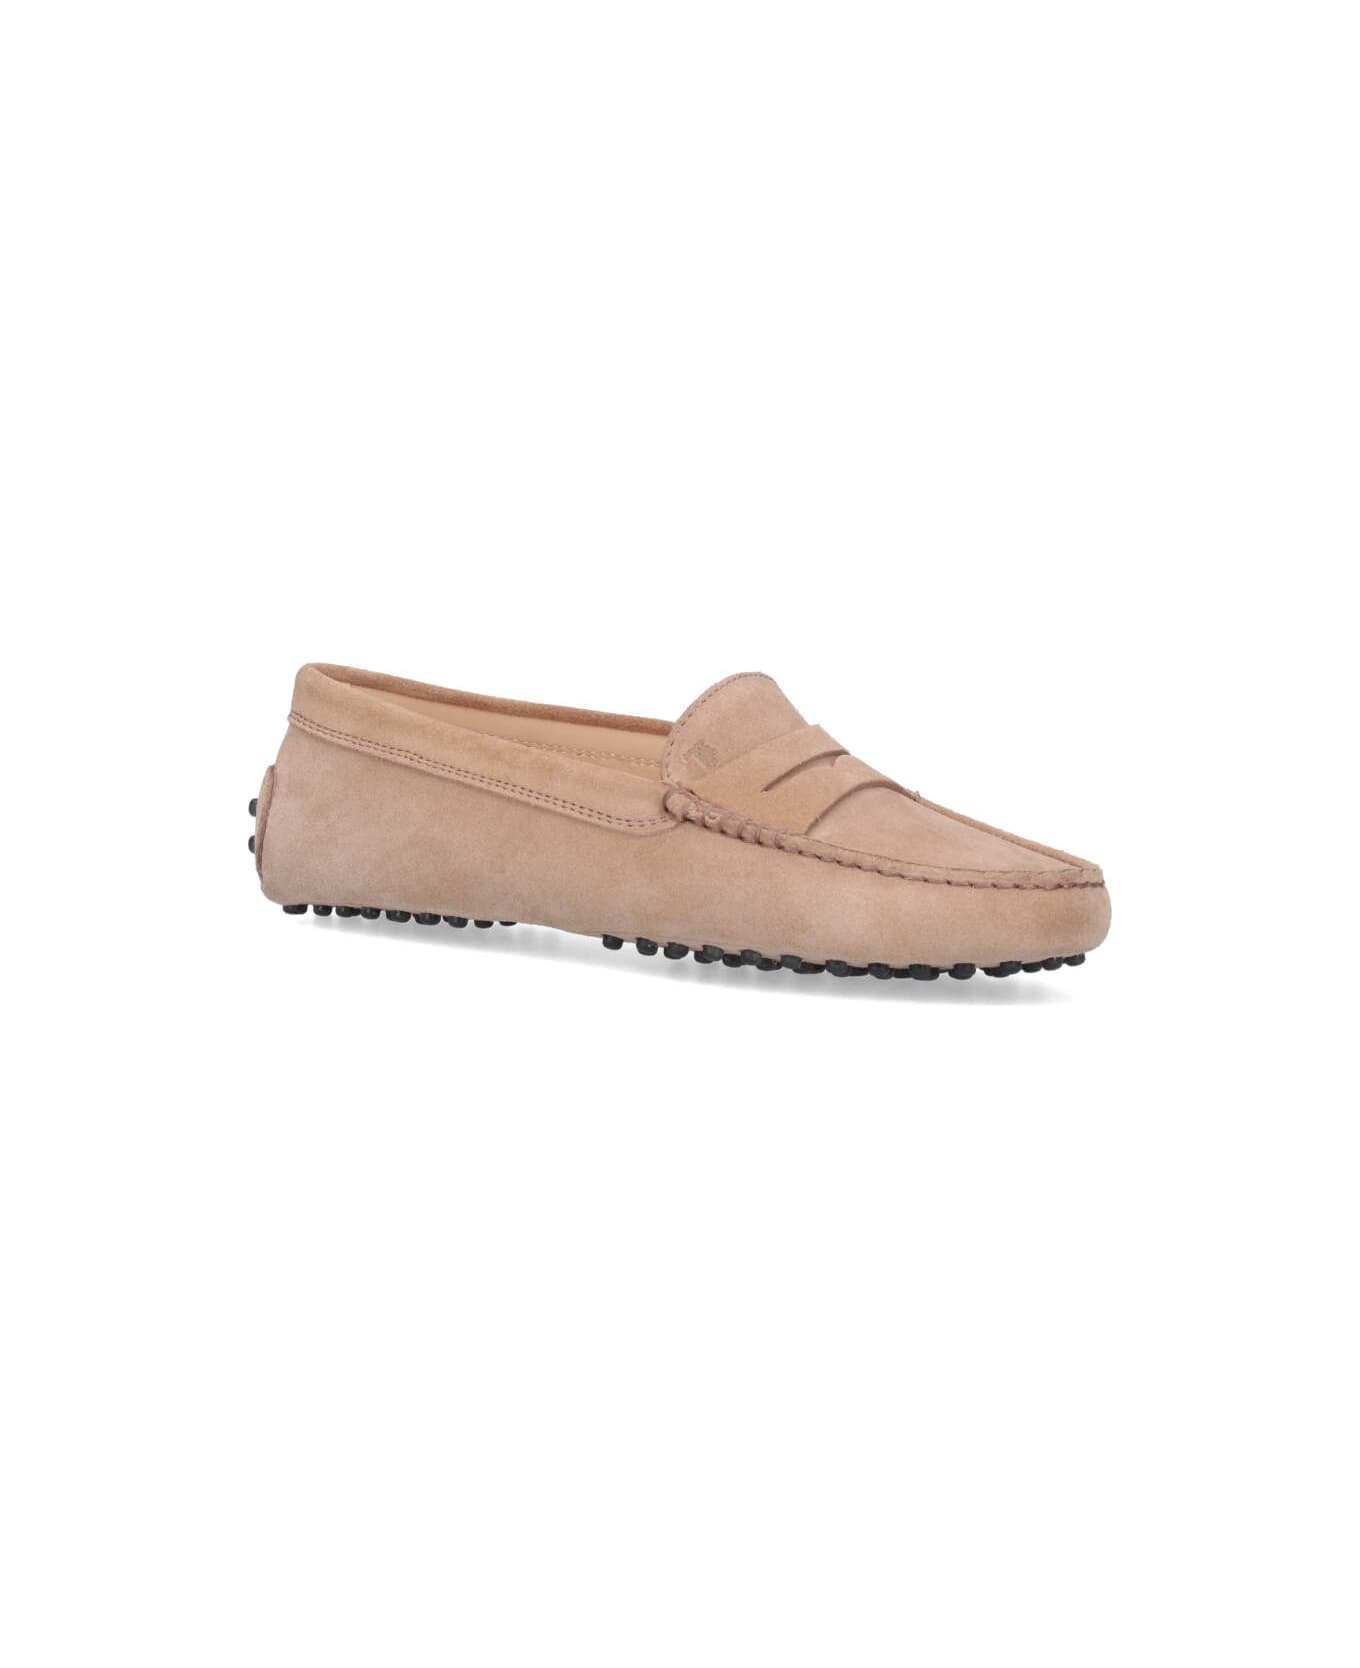 Tod's Gommino Driving Loafers - Beige フラットシューズ